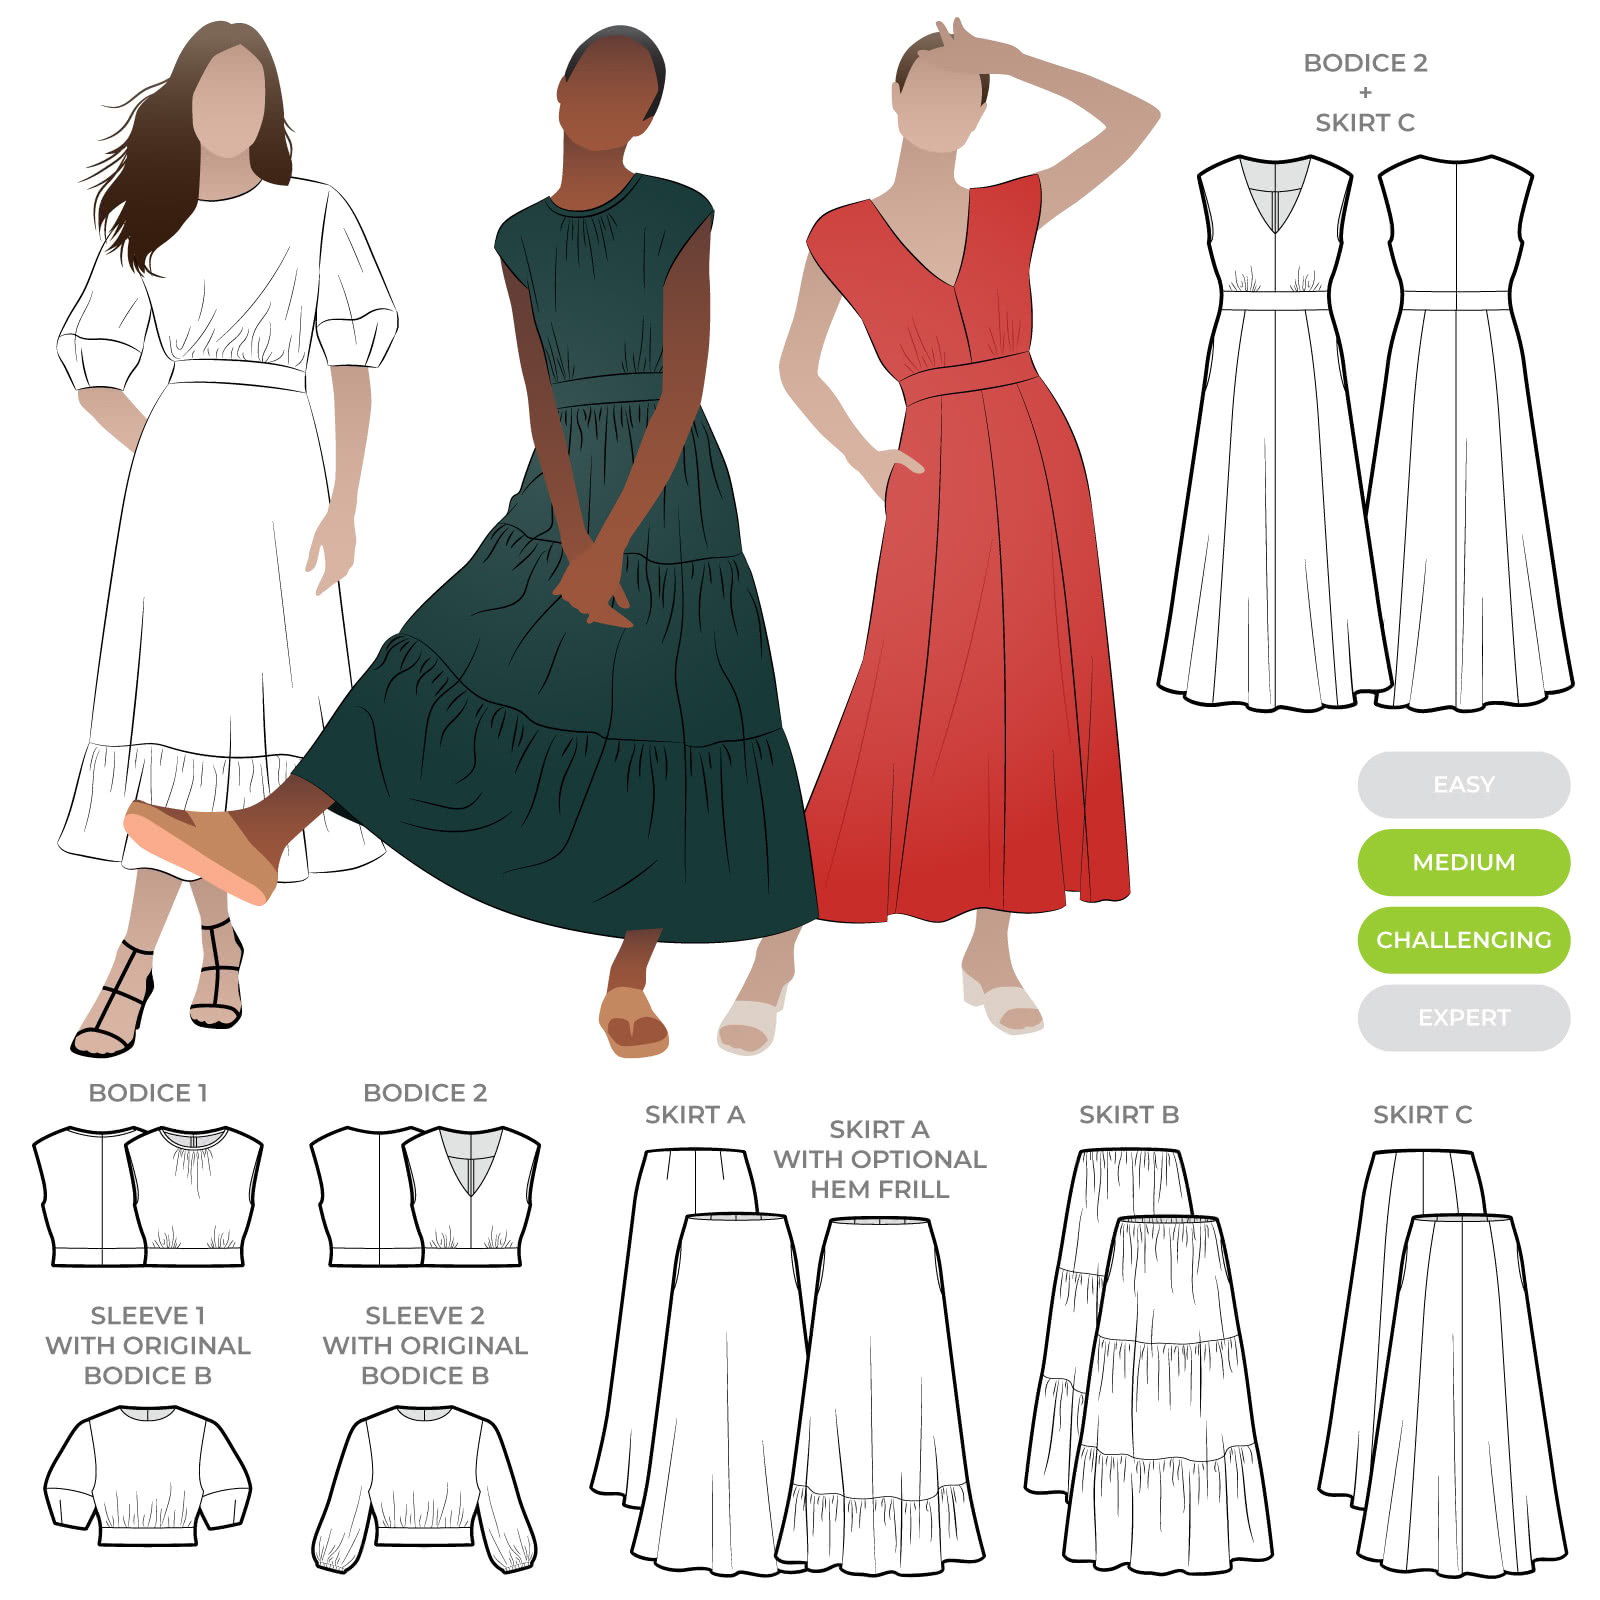 Trinnie Extension Pack By Style Arc - You will need the original Trinnie Woven Dress pattern to use this extension pack. The extension pack includes 2 new bodices, skirts and sleeves.